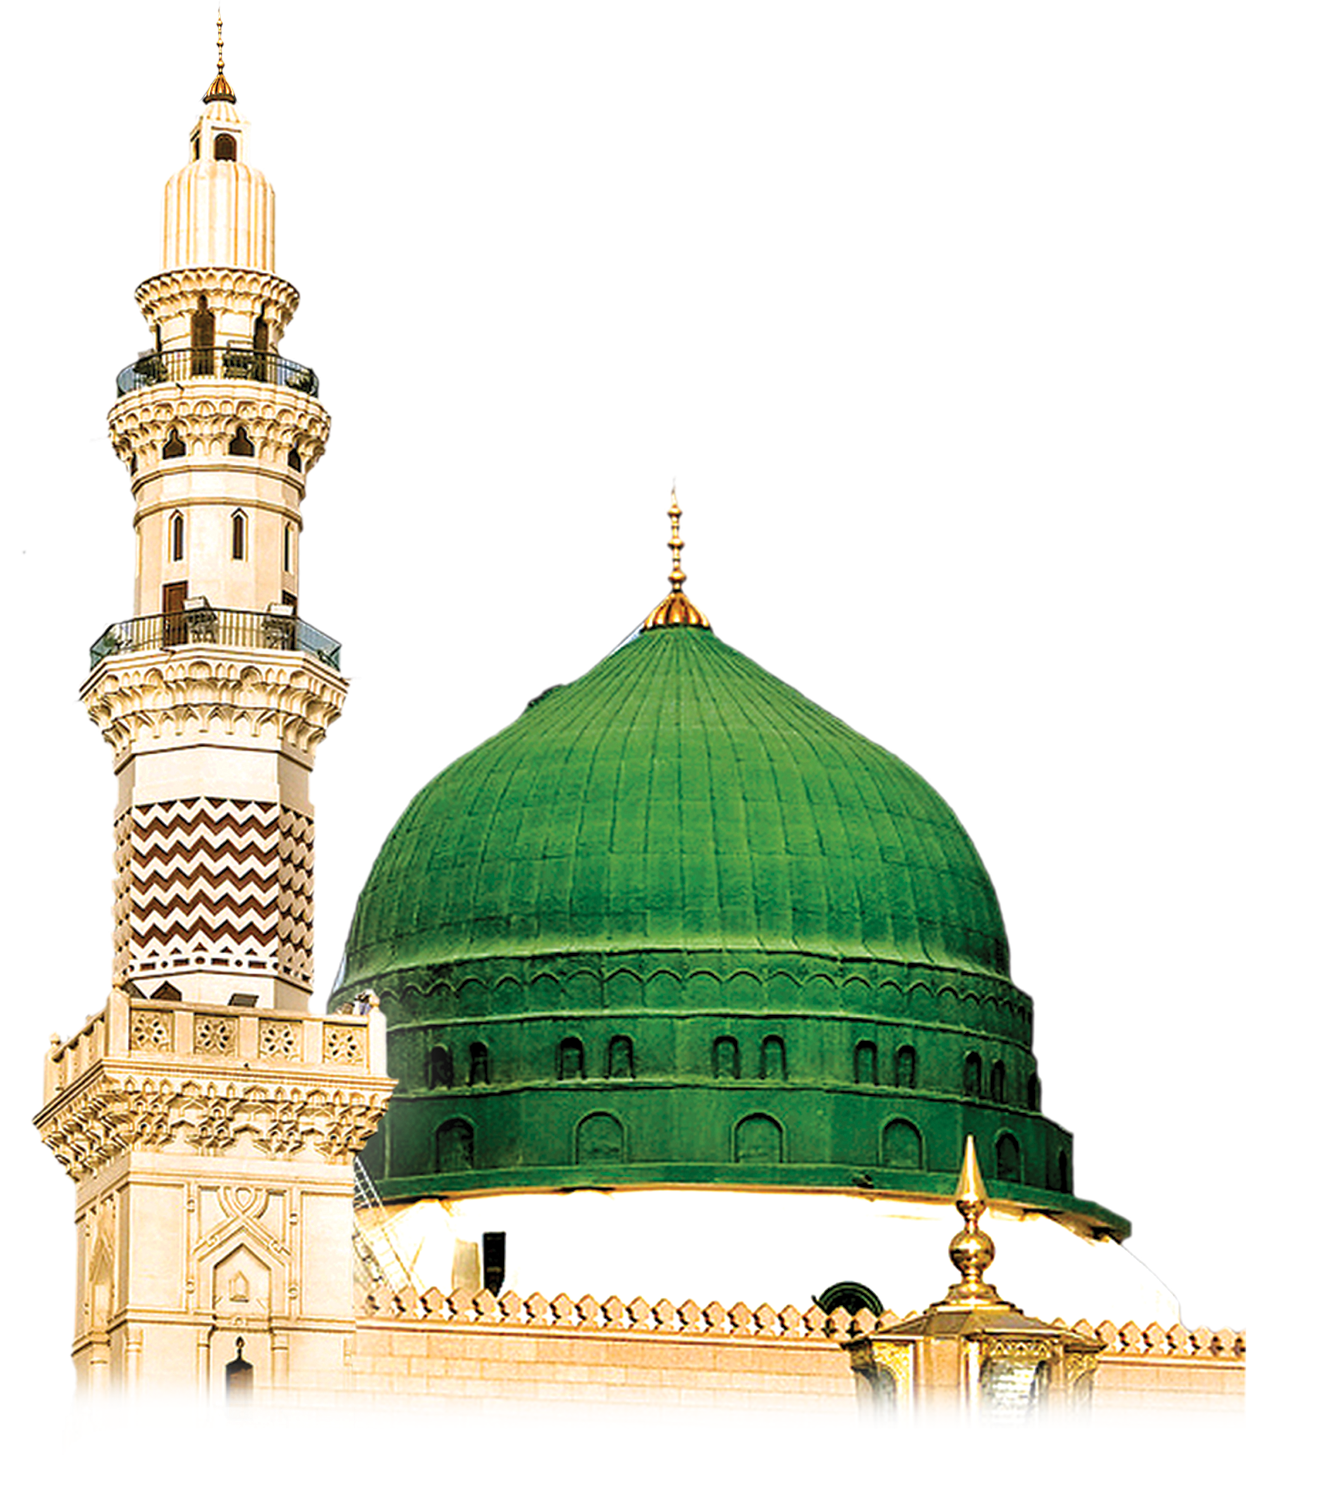 The famous green dome of the 